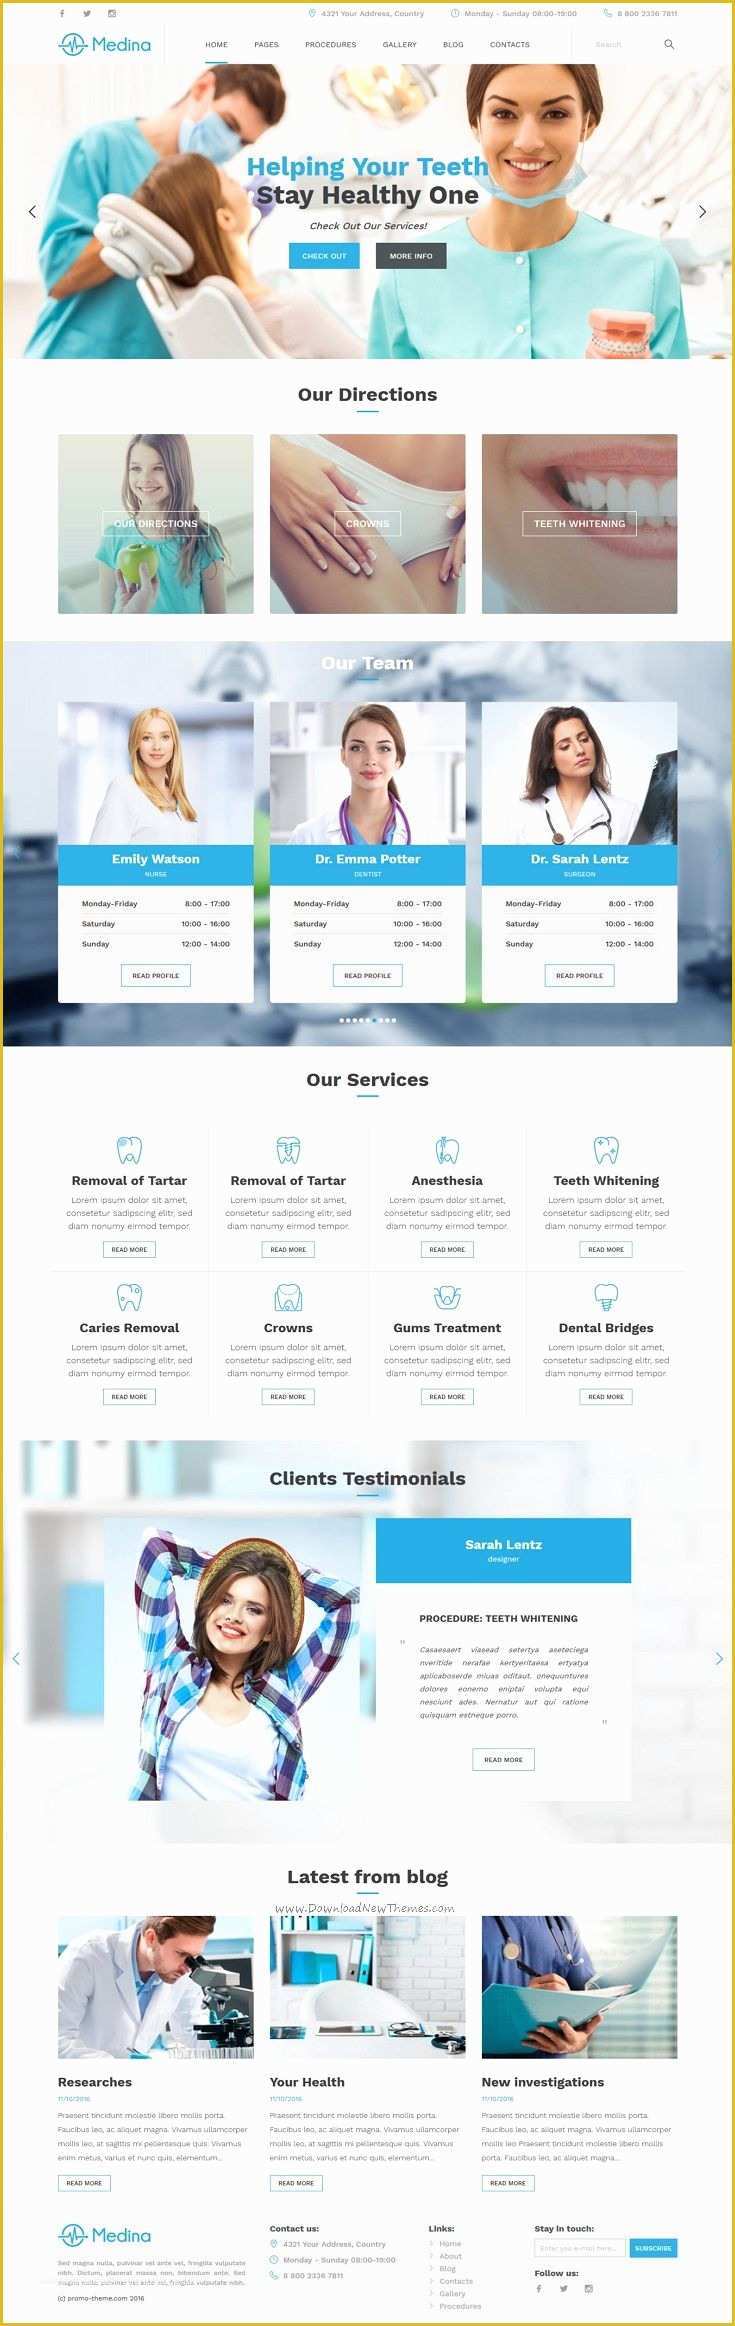 Acupuncture Website Template Free Of 8 Best Acupuncture Website Templates Images On Pinterest